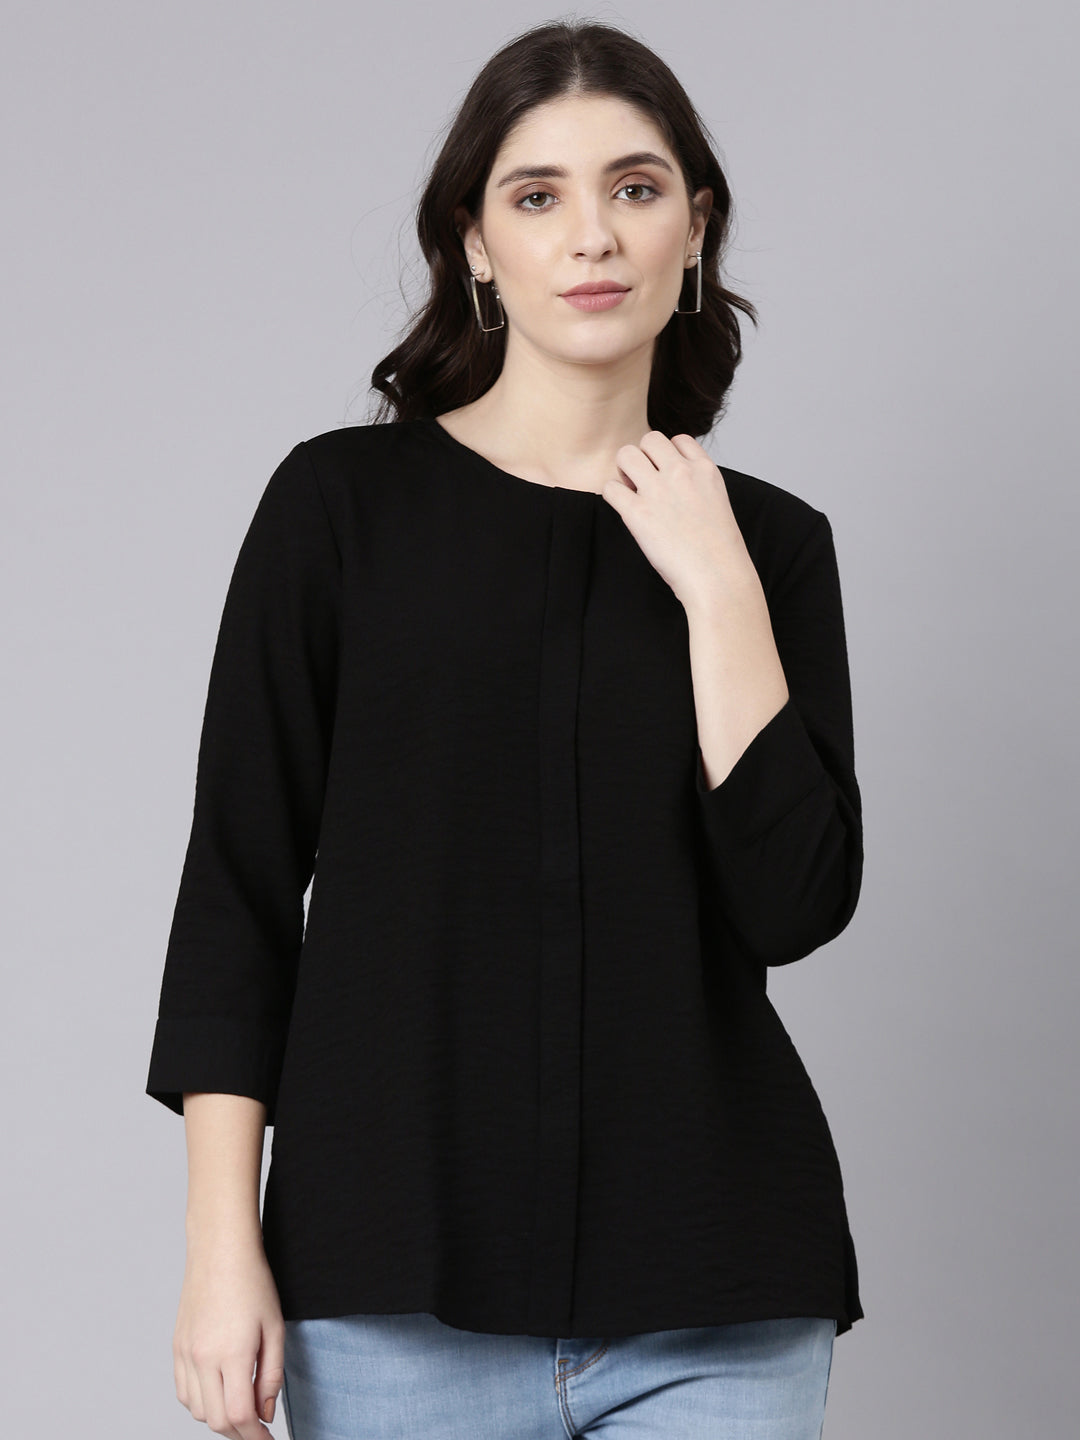 TheShaili Poly Crape Casual Black Round Neck Top for Womens & Girls/Casual Top for Office College Work Casual Wear